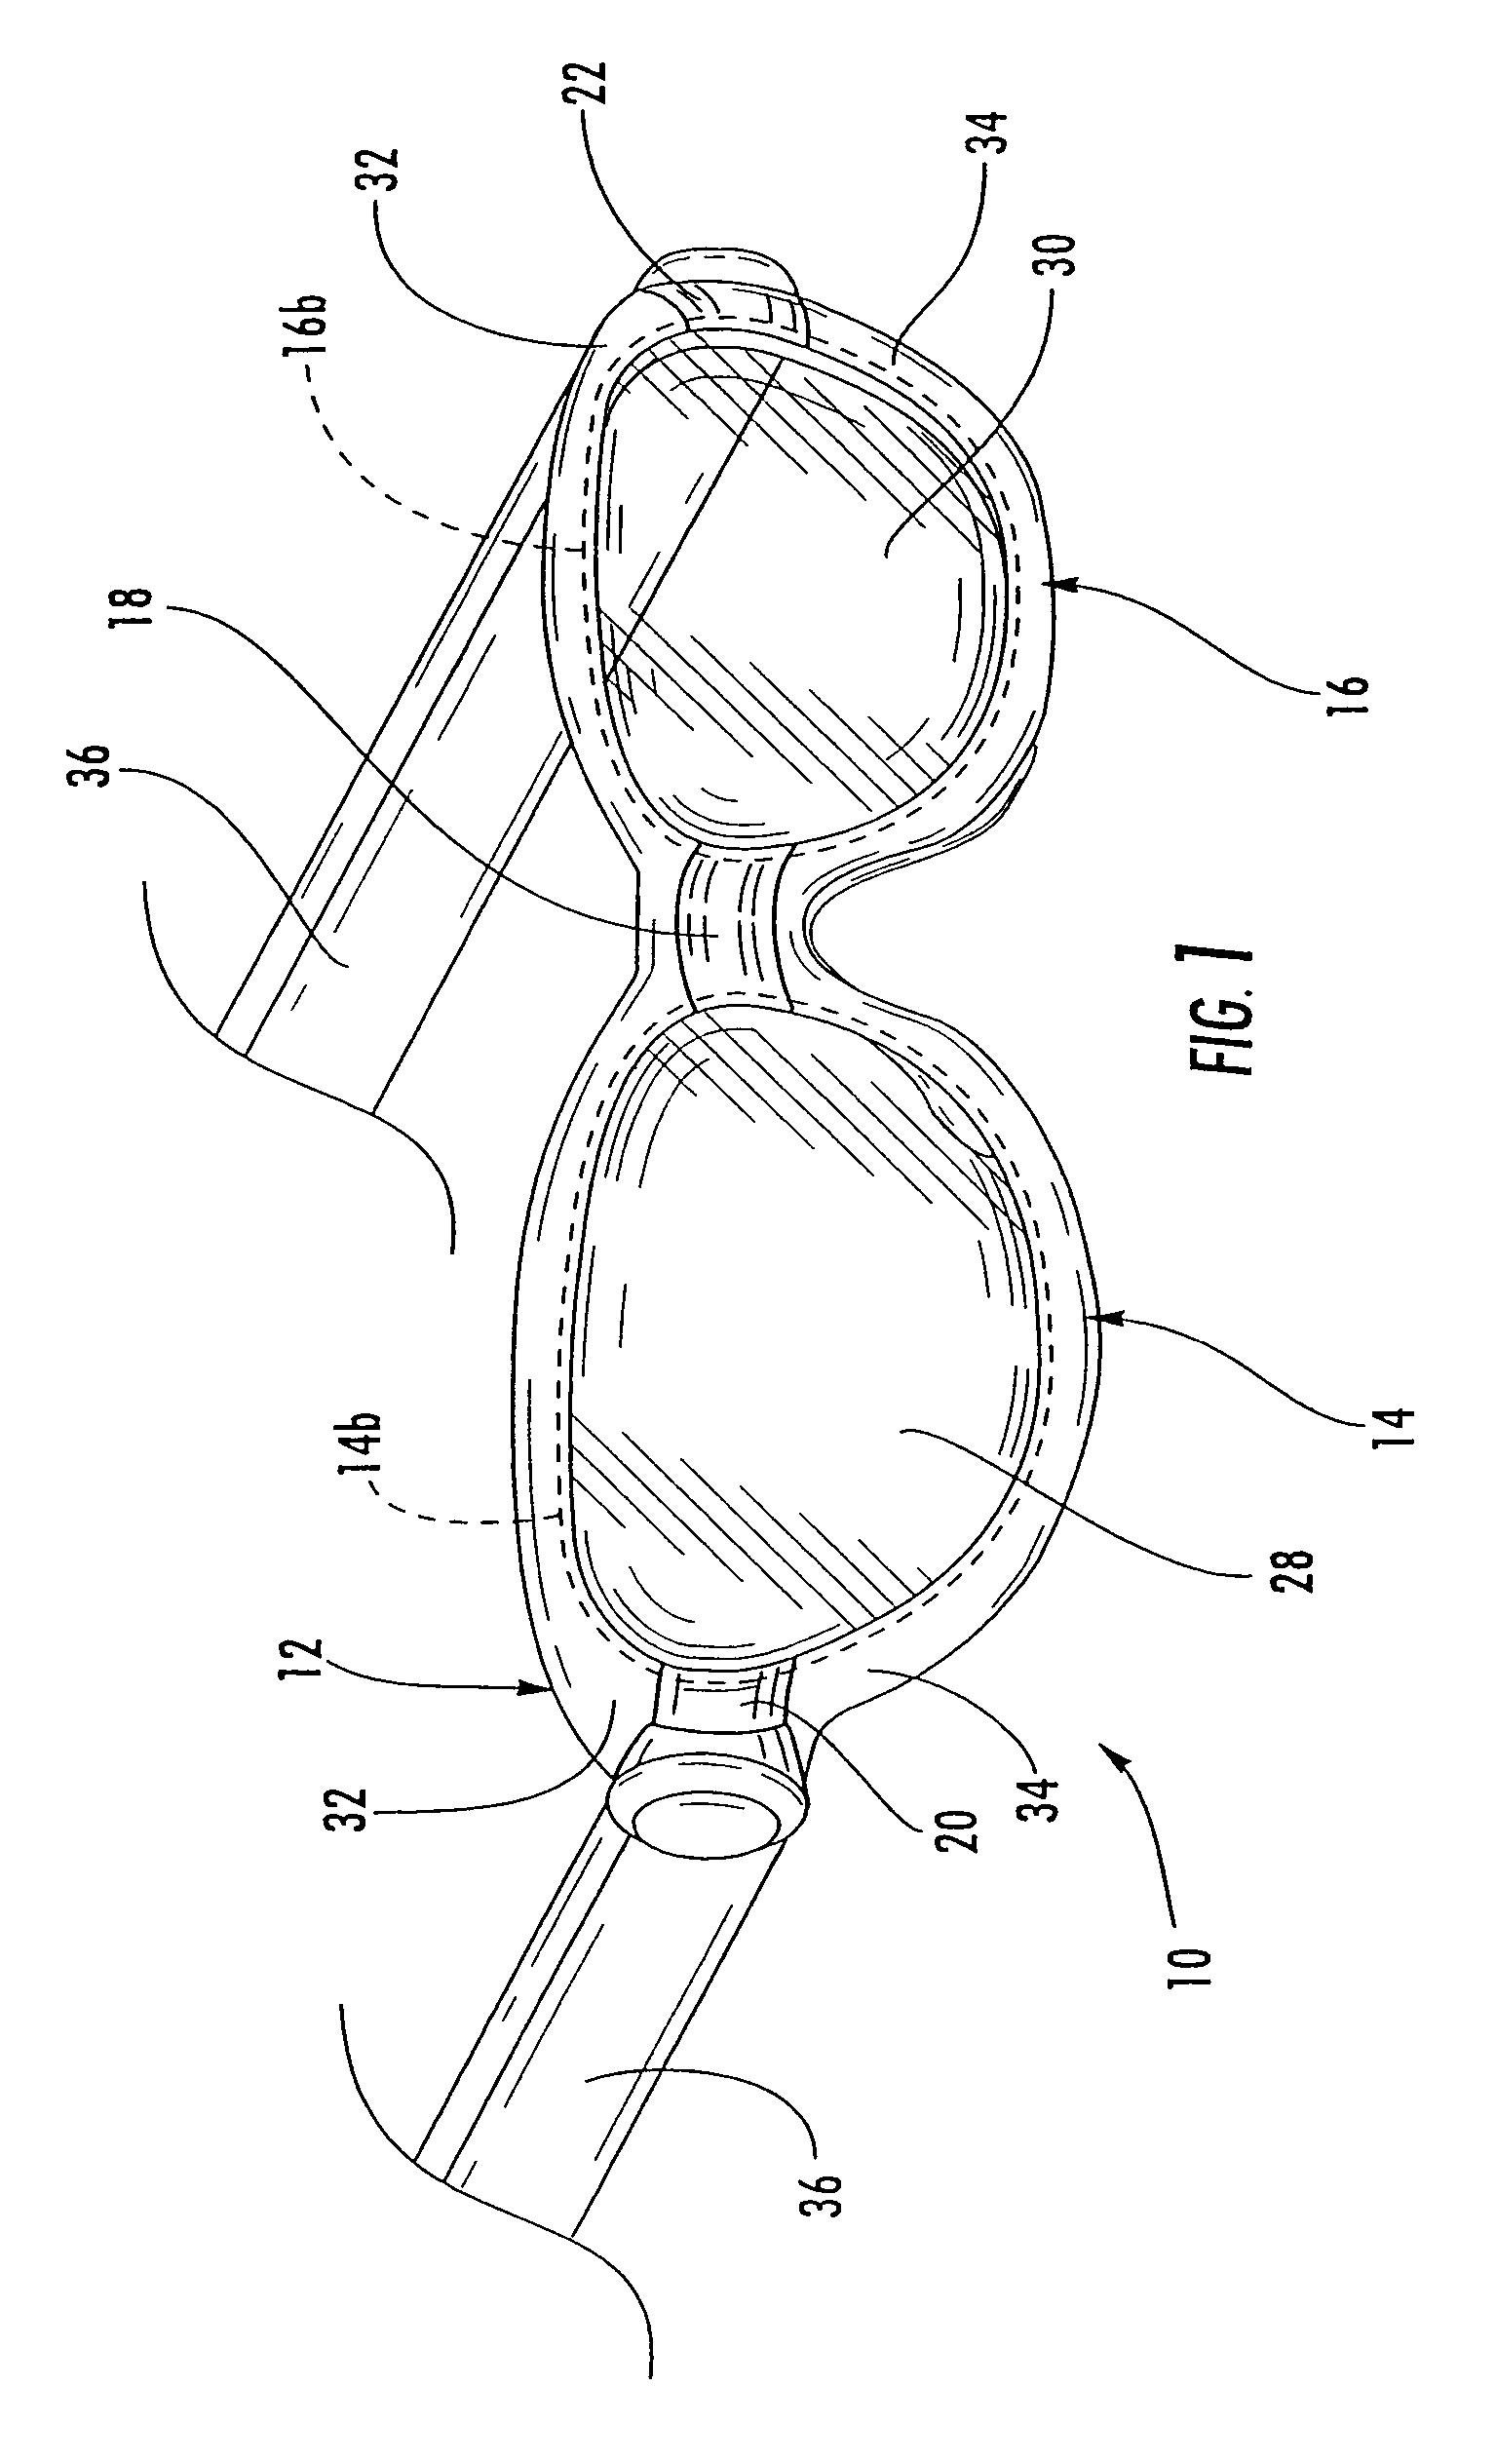 Safety glasses with flexible frame and interchangeable dual-lenses